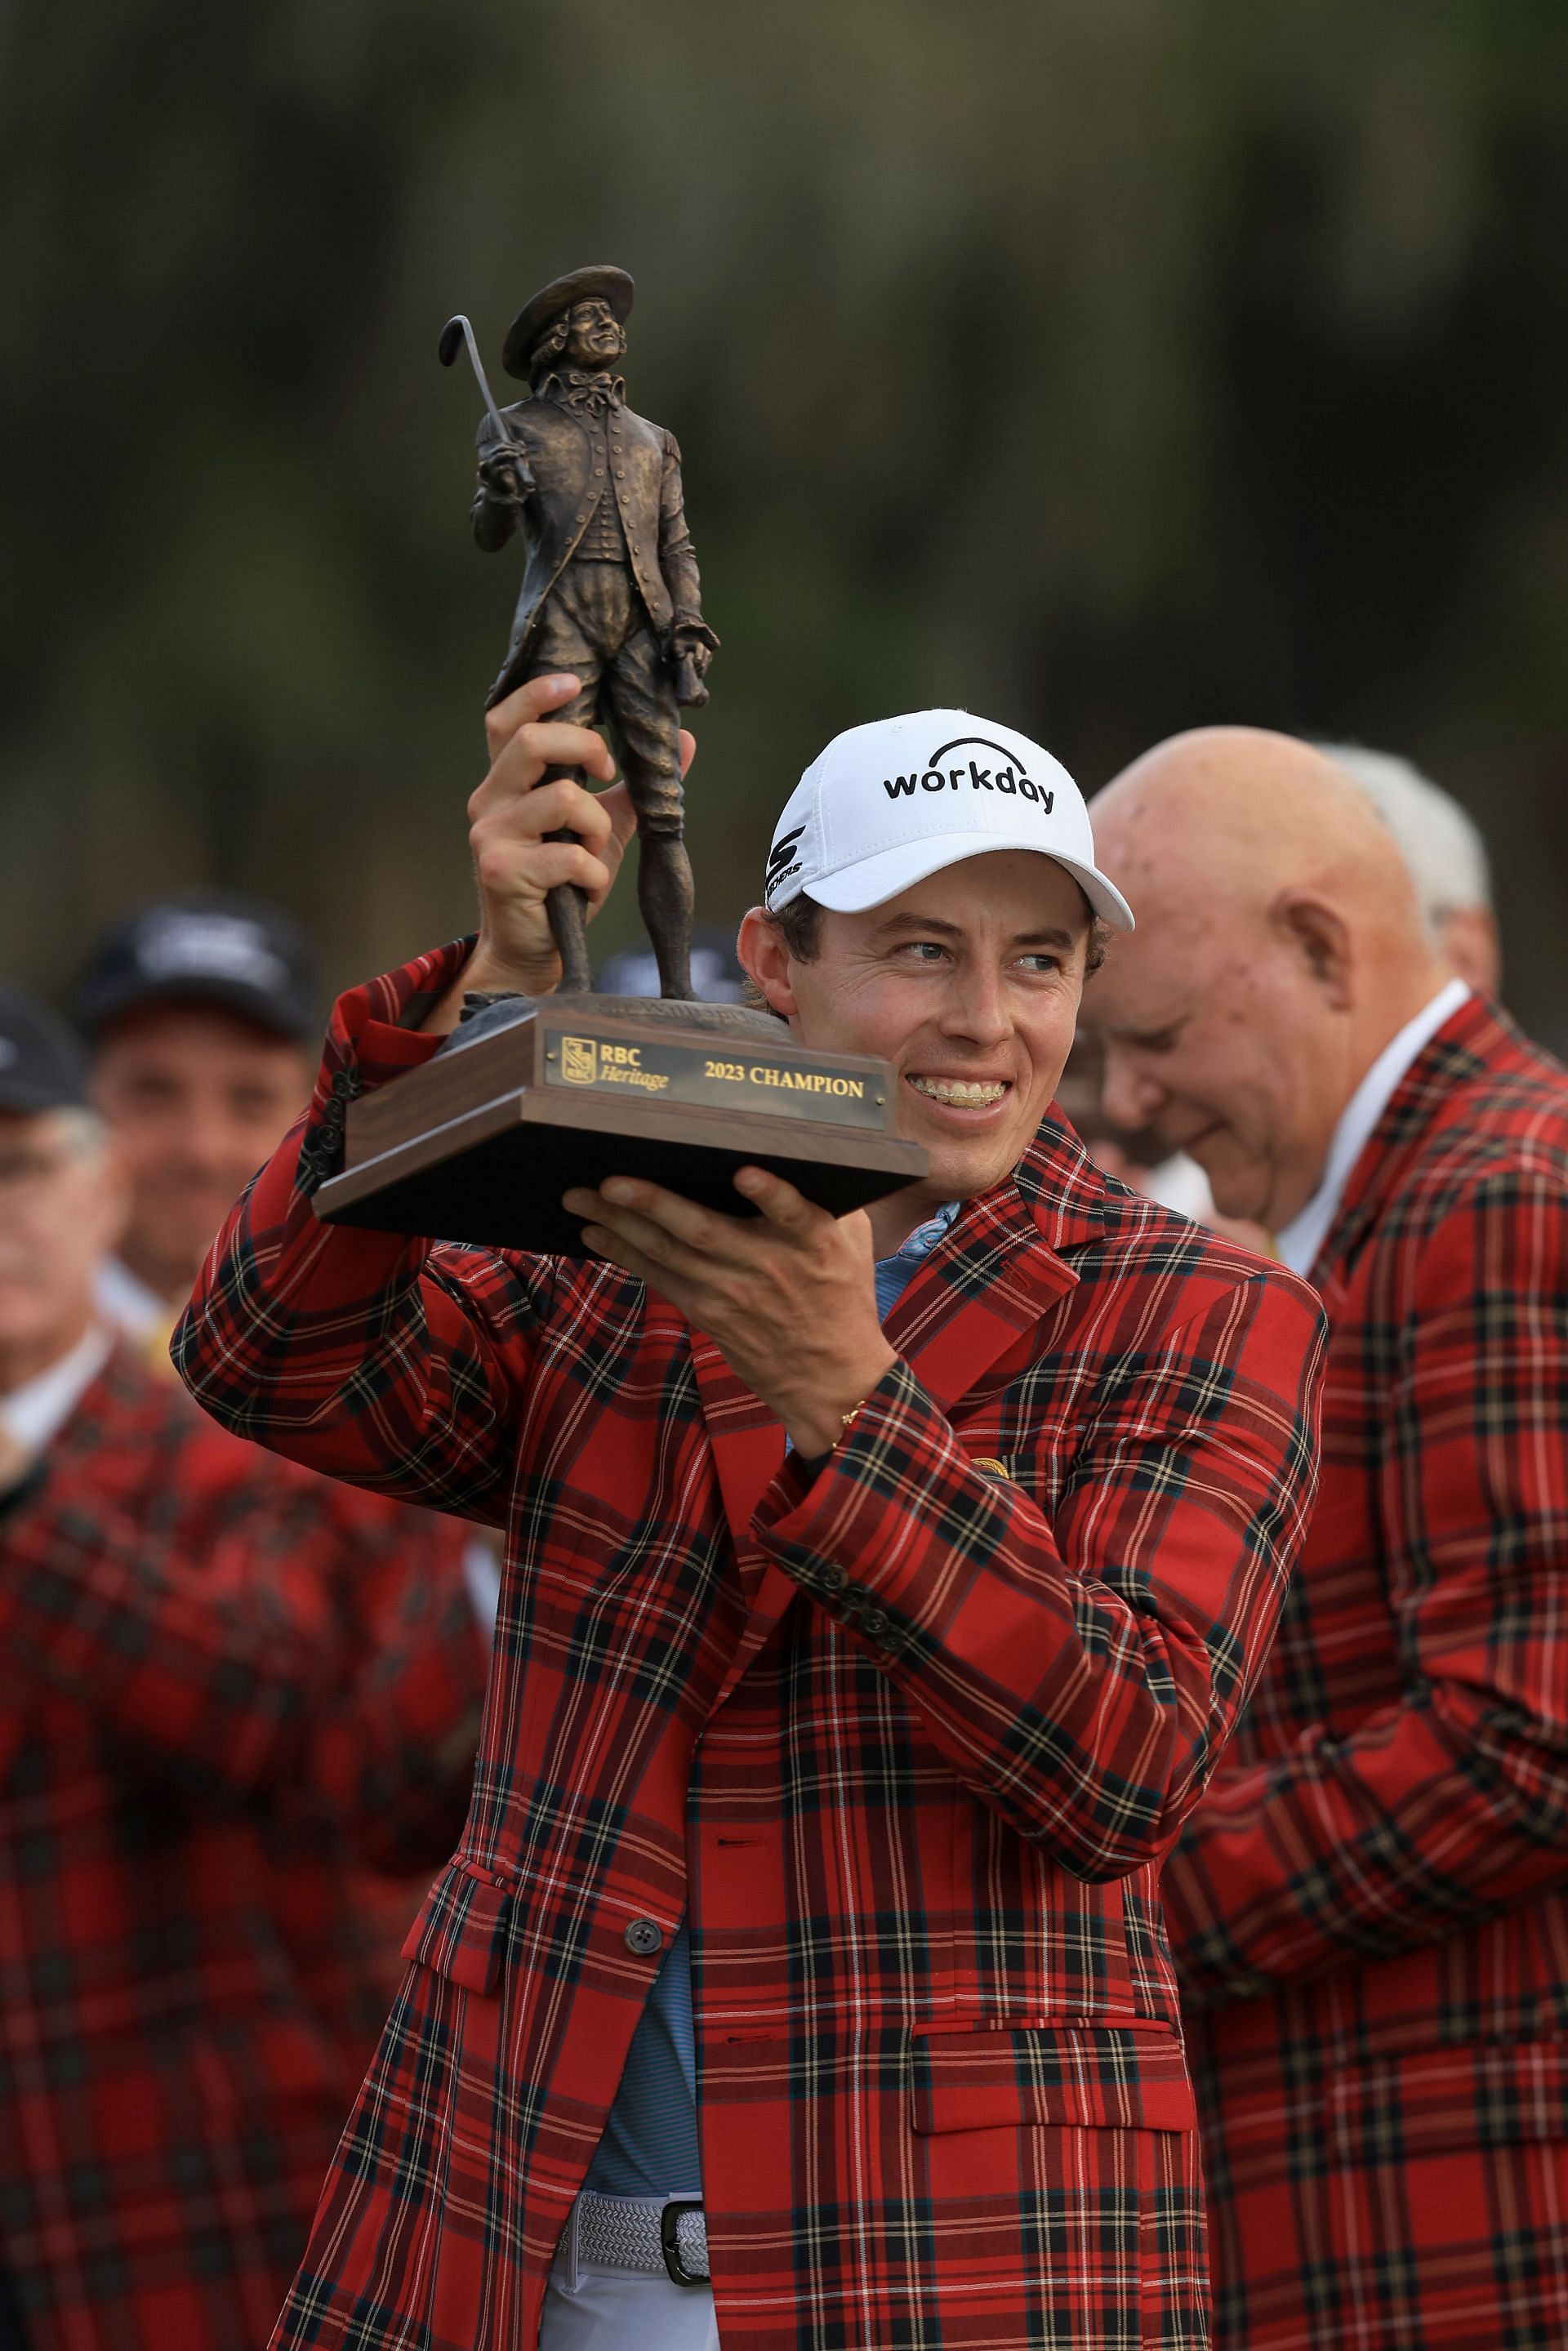 Matt Fitzpatrick of England celebrates with the trophy in the Heritage Plaid tartan jacket (Image via Getty)